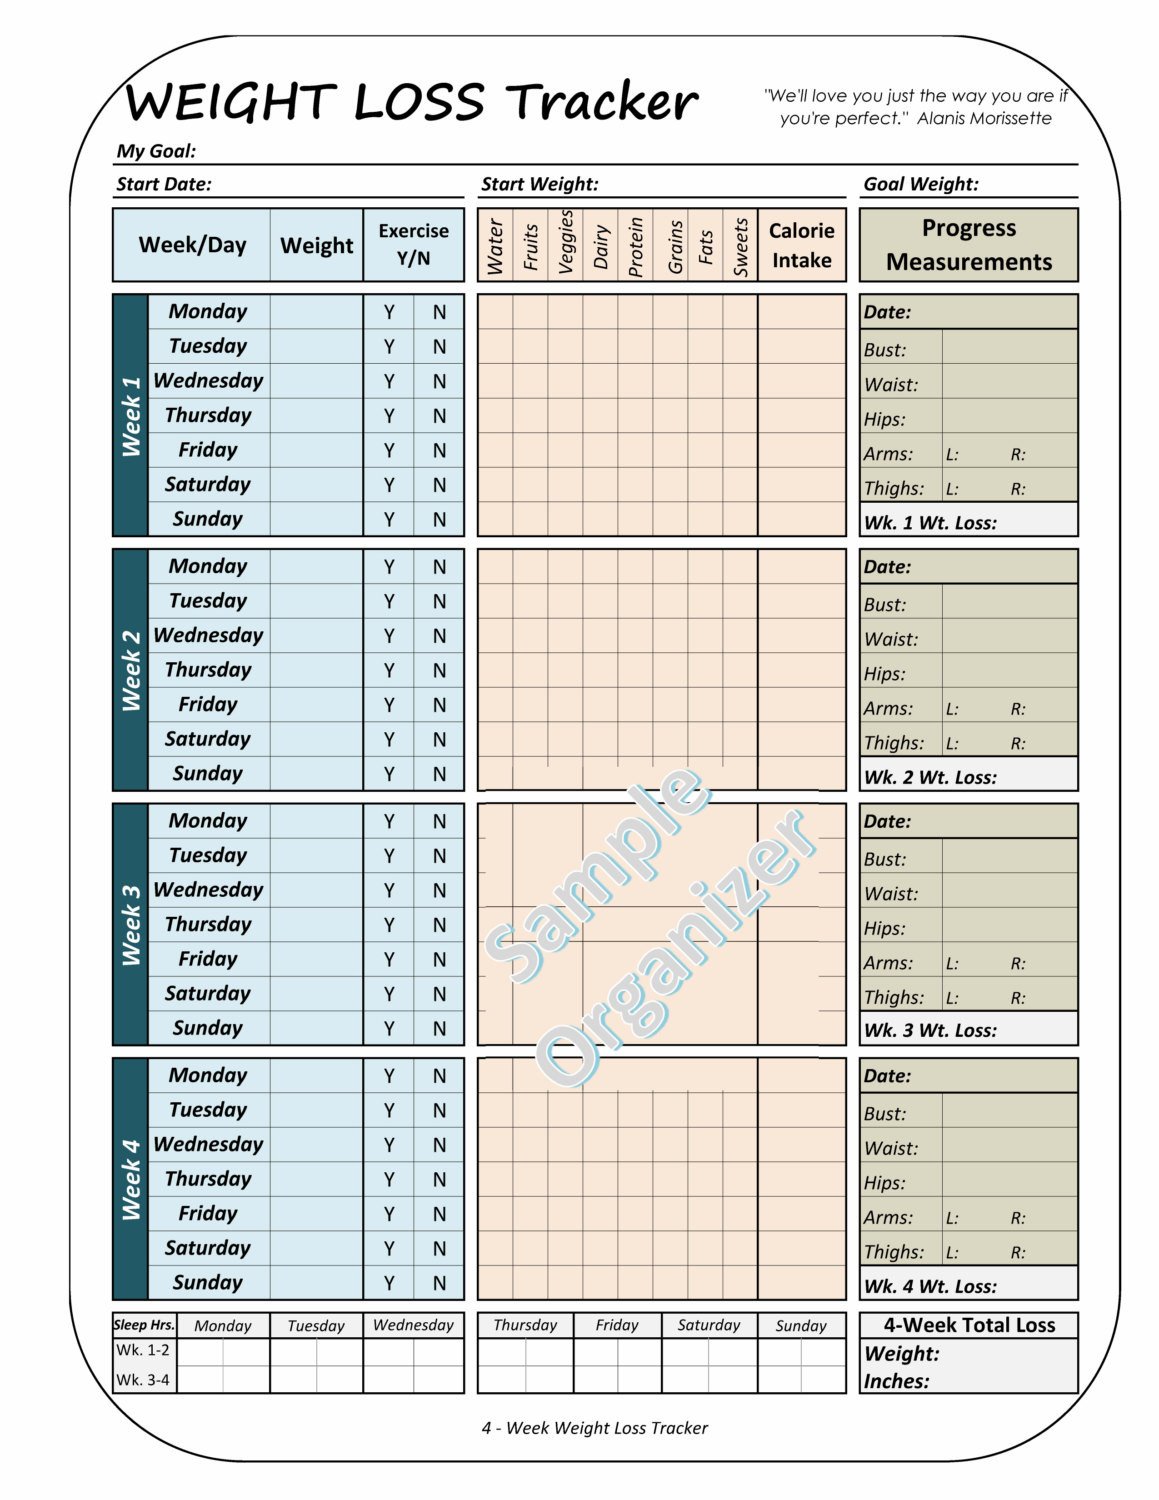 Weight Loss Tracker Template Weight Loss Tracker Printable Weight Loss Planner 4 Week